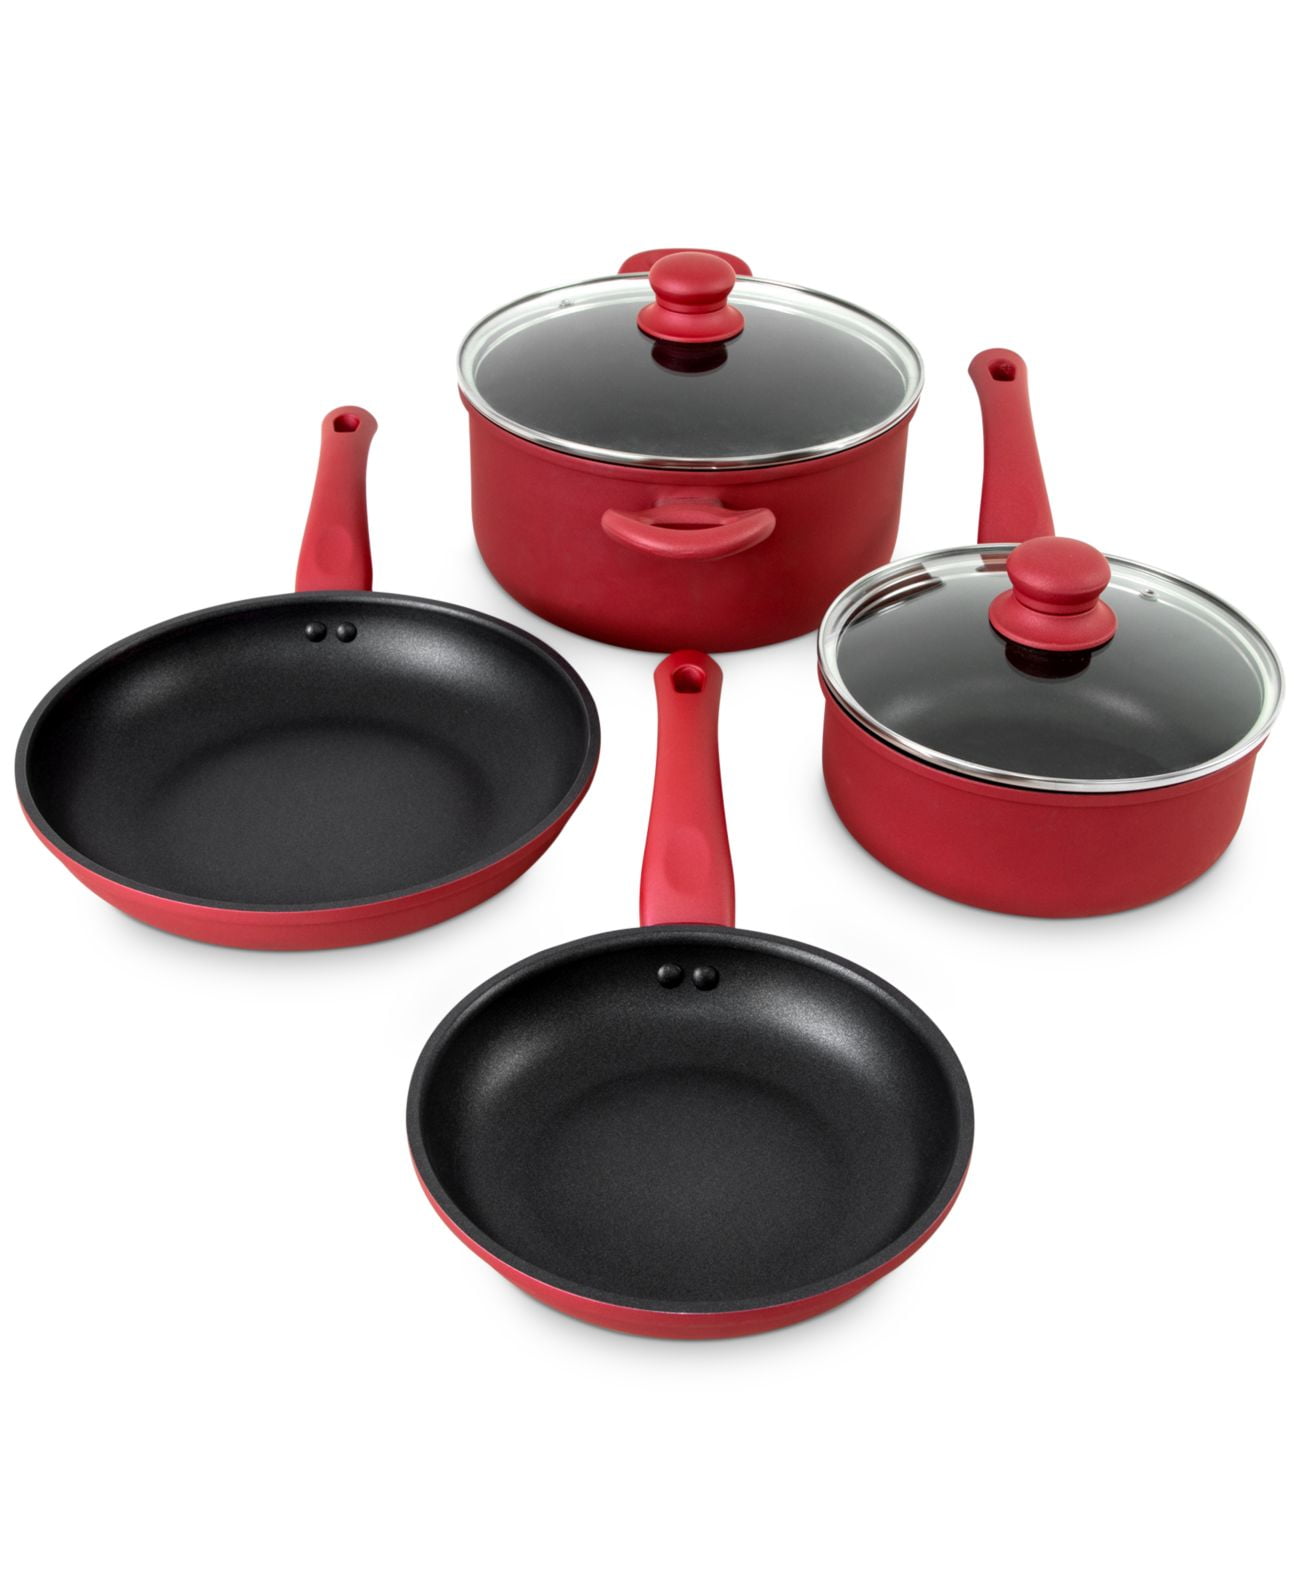 Dropship 6 PCS Nonstick Cookware Set, Kitchen Cookware Set, Pan Set, Frying  Pan, Stock Pot, Milk Pan With Cool Touch Handle Red to Sell Online at a  Lower Price